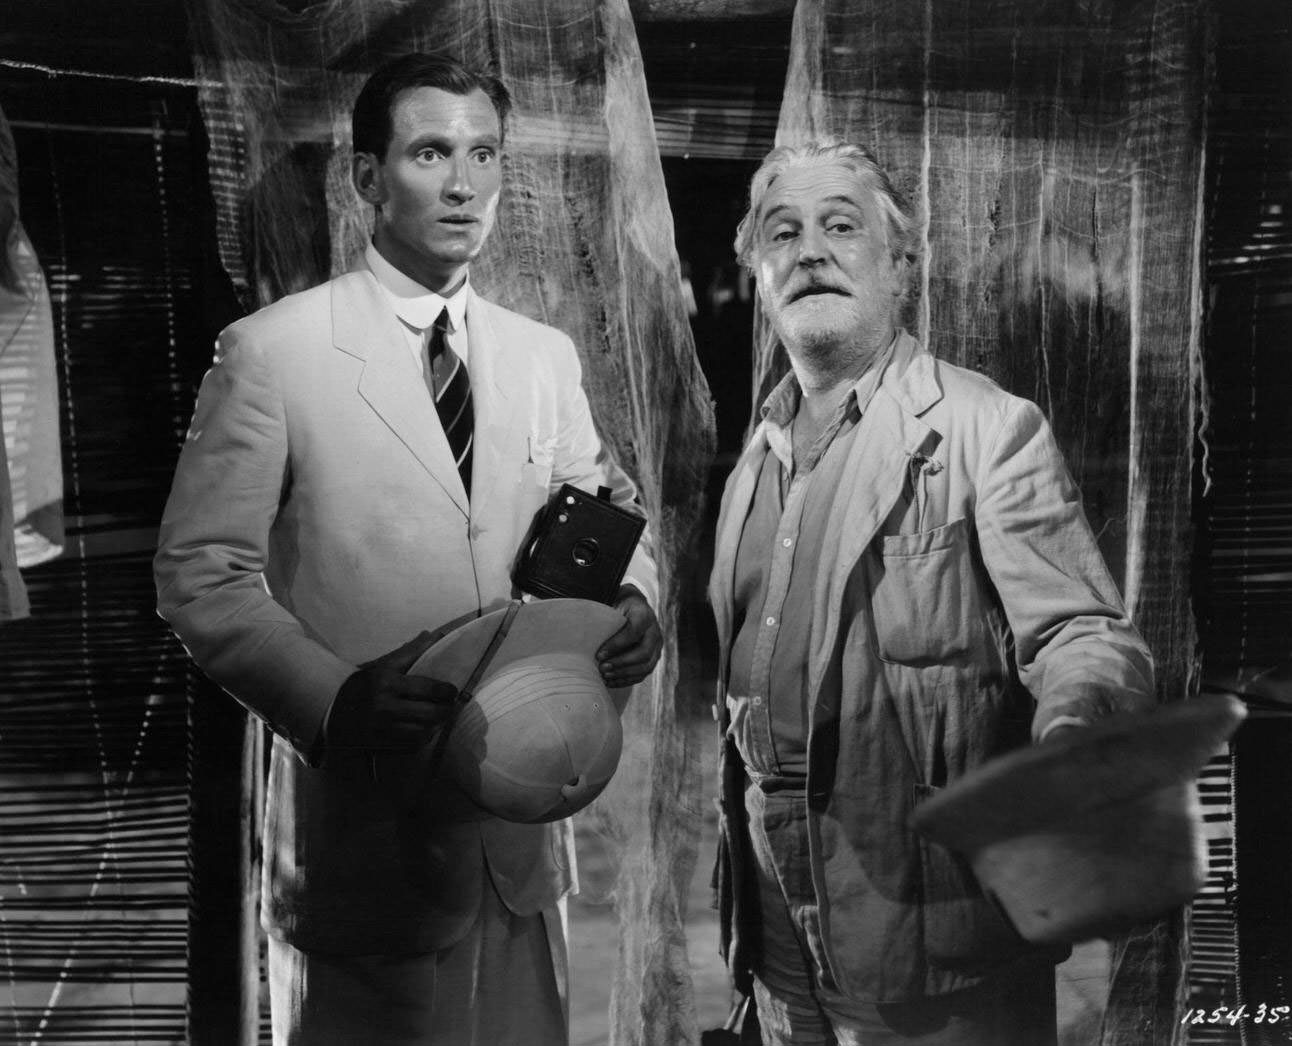 Richard Ainley is shocked as Frank Morgan presents Africa to him in a scene from the film 'White Cargo', 1942.